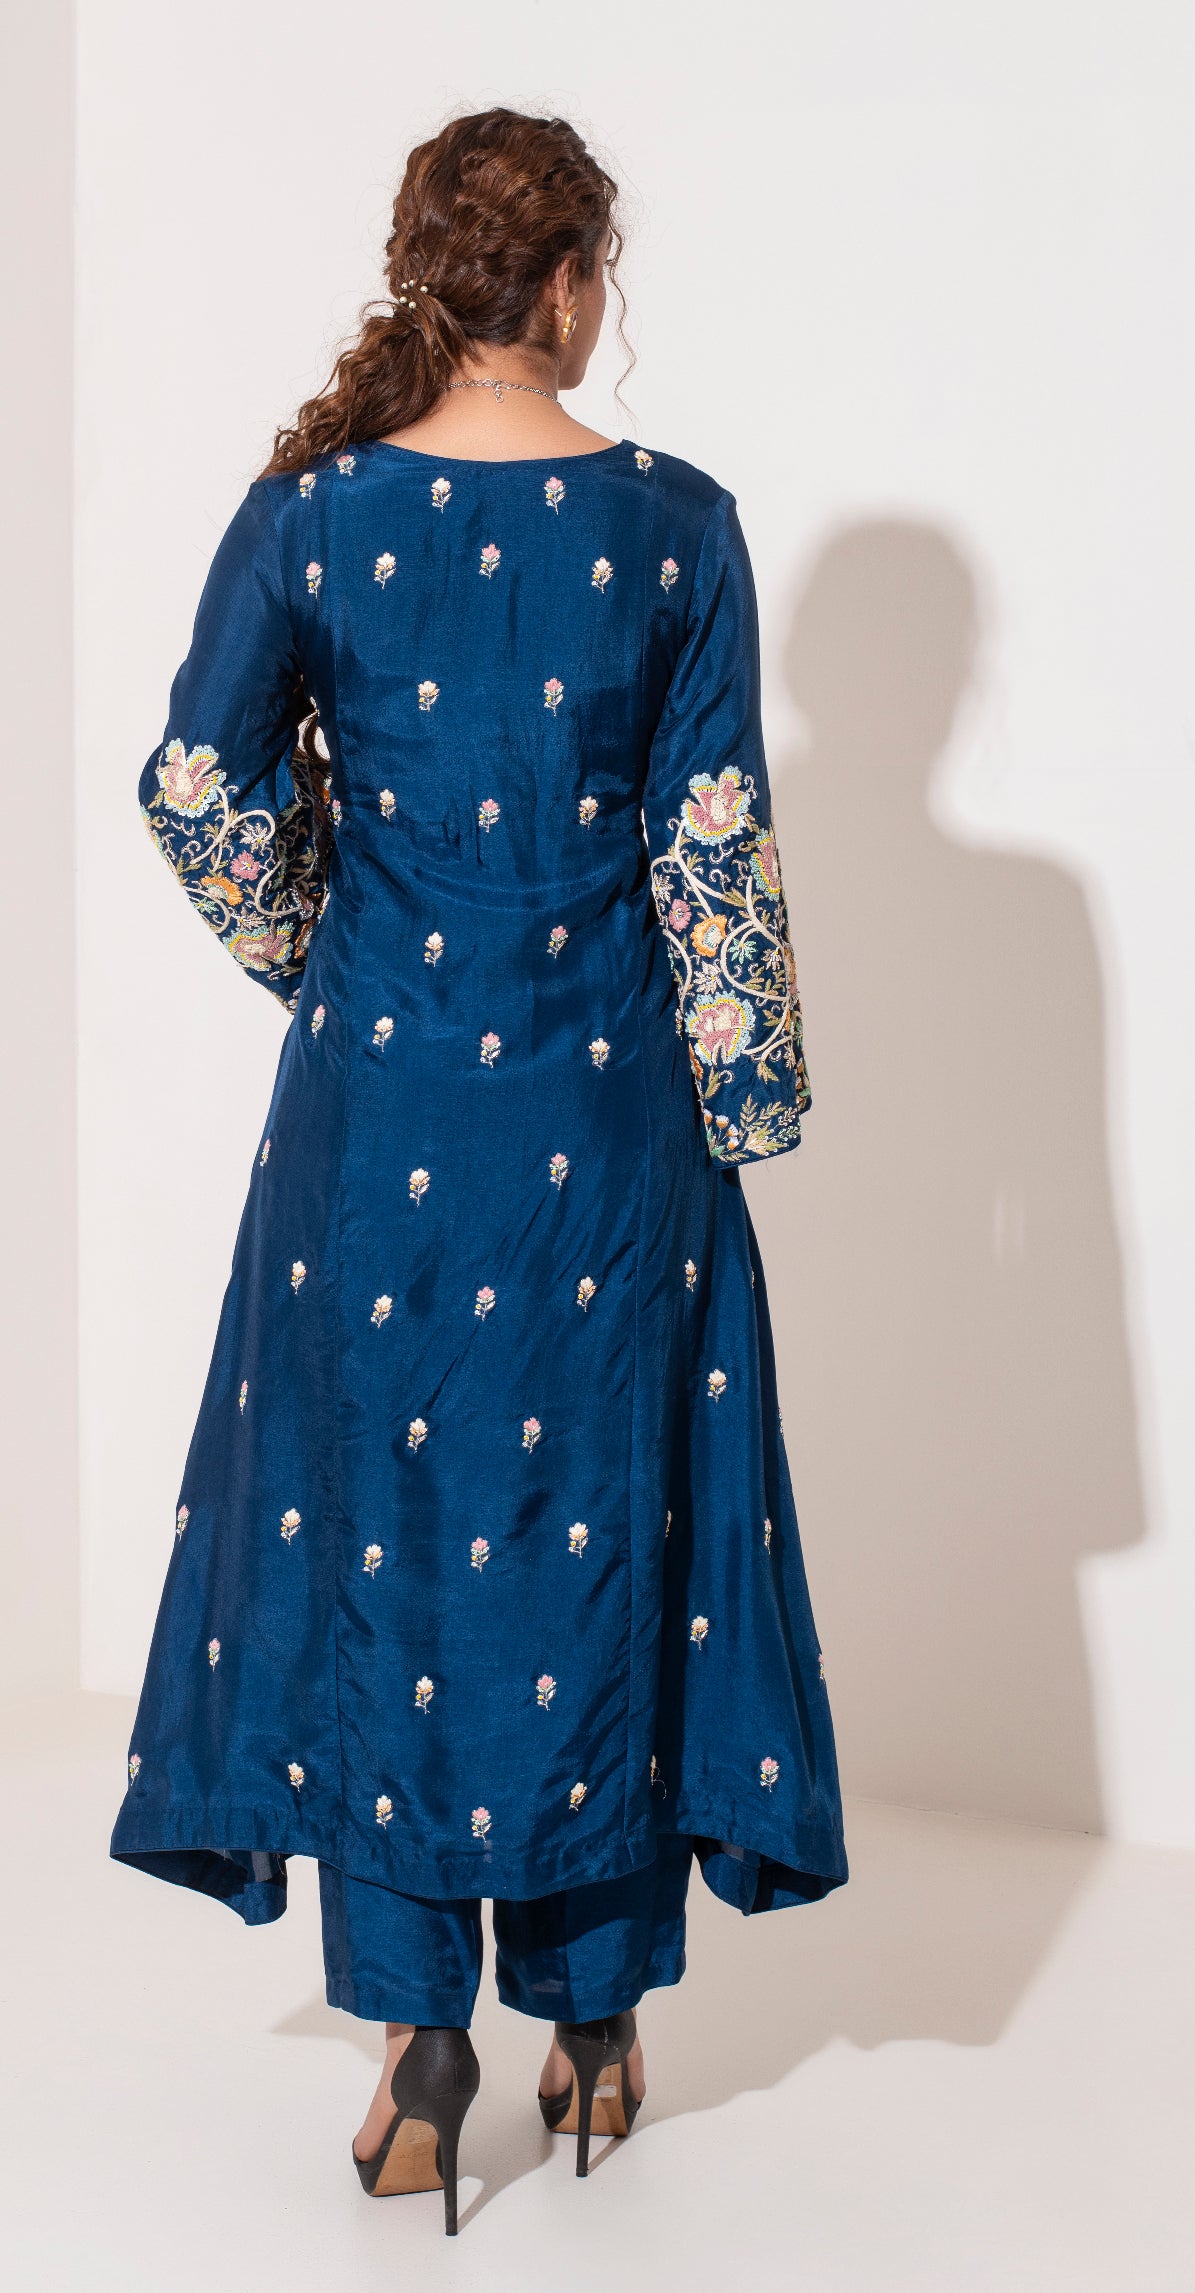 Heavy Resham and zardozi embroidered indigo blue suit with organza dupatta and pants